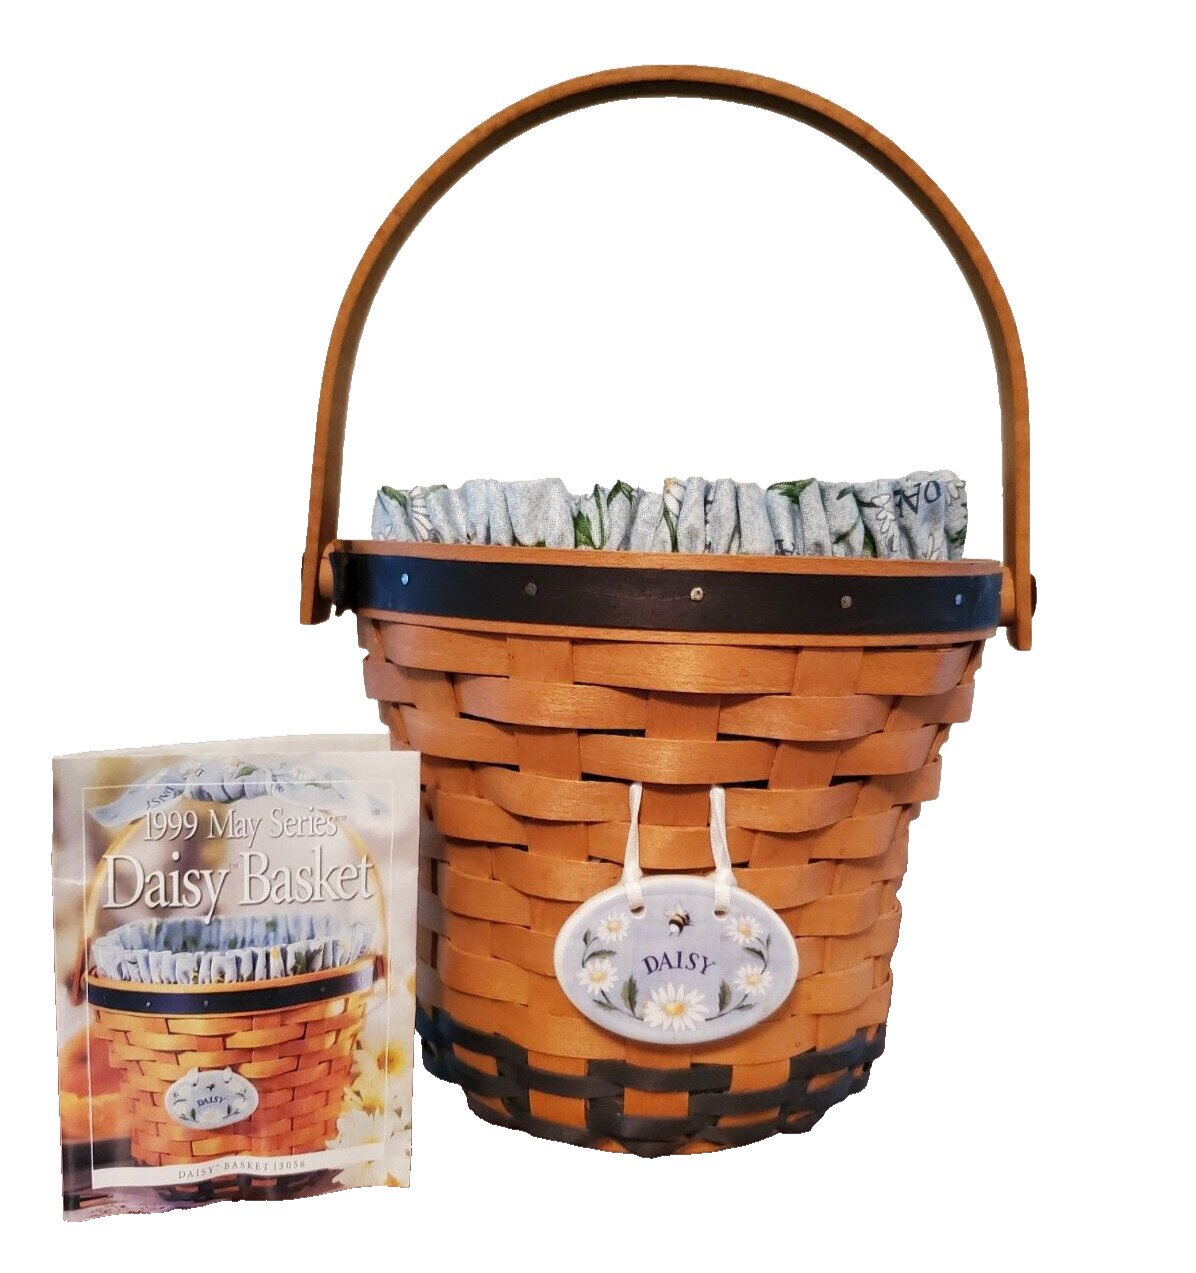 1999 Longaberger  May Series DAISY BASKET w/ Protector, Liner, Card and Tie-On